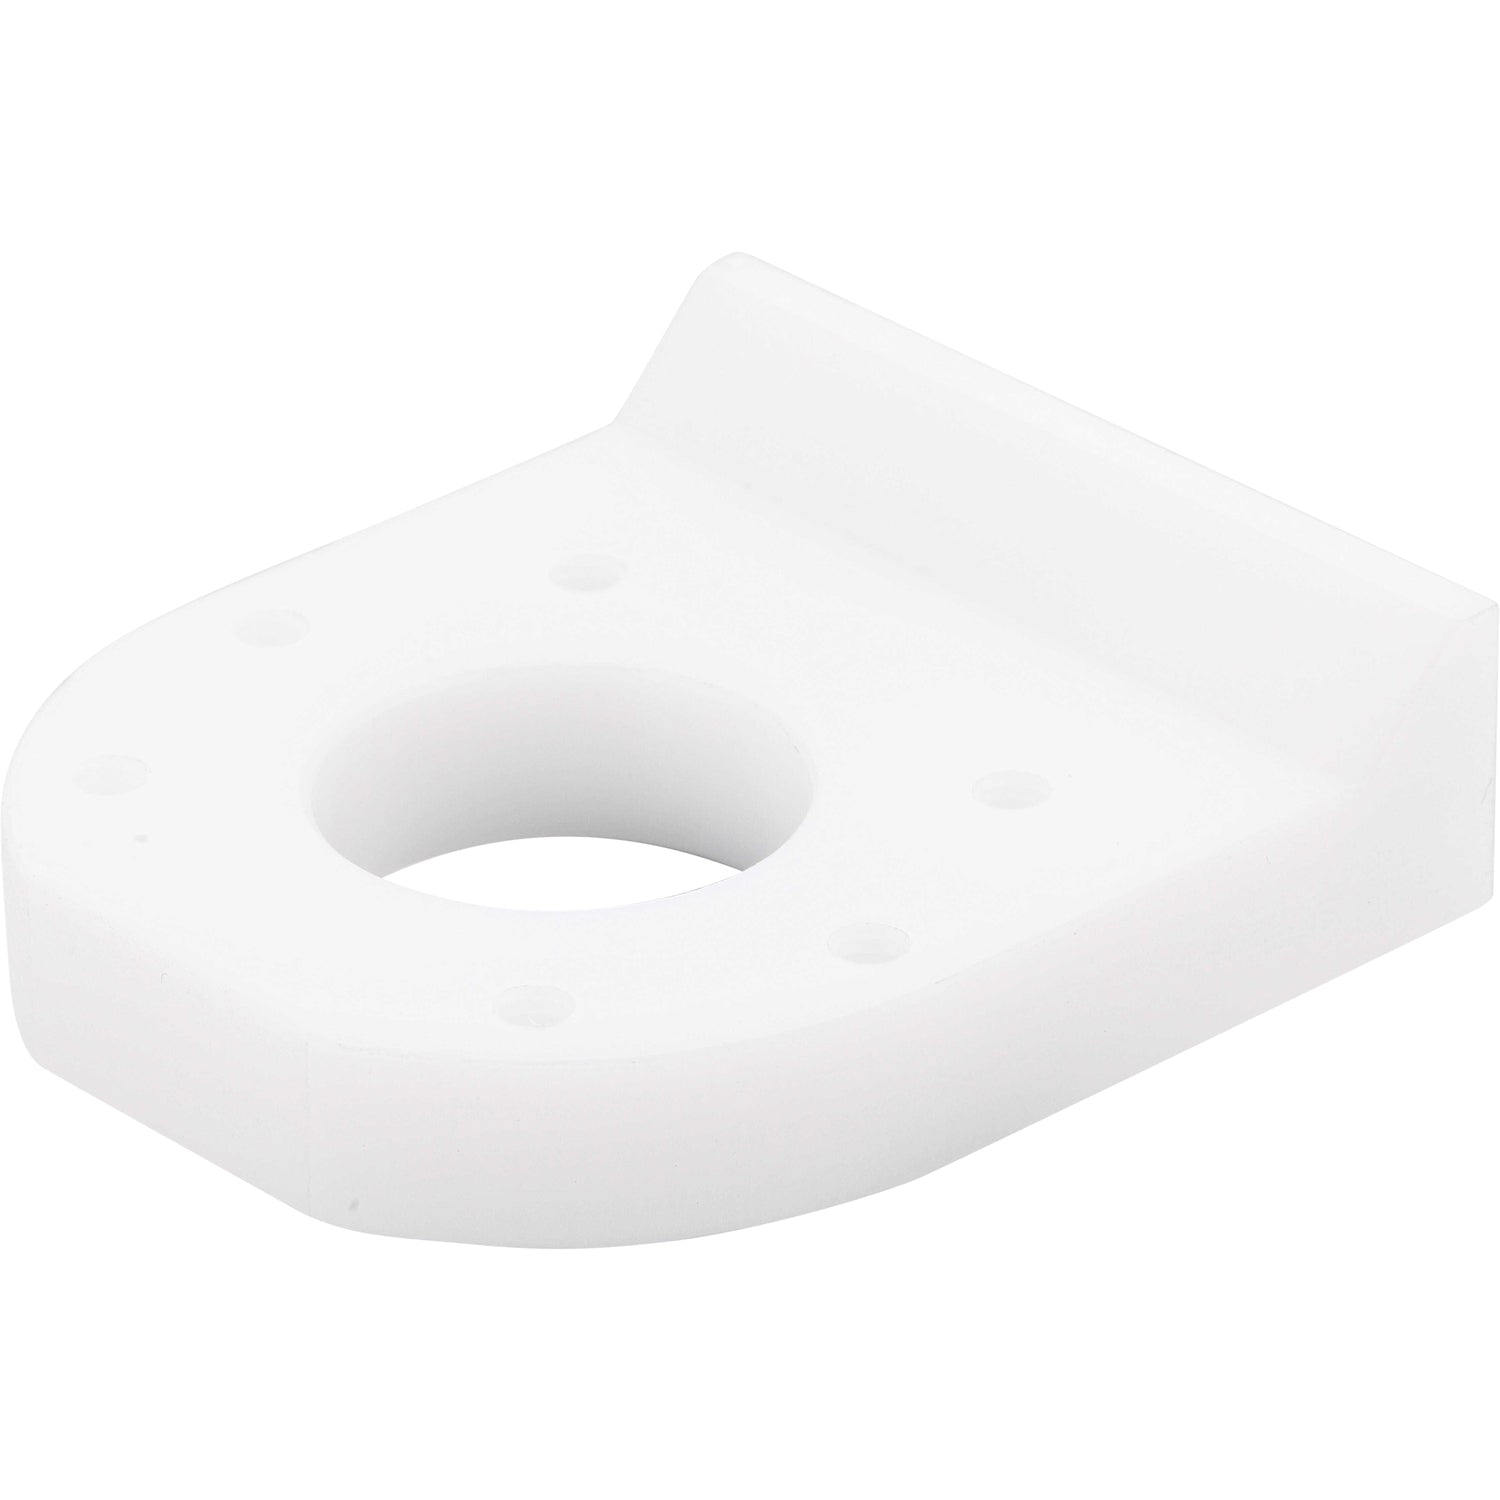 White machined plastic wedge part with  four small mounting holes and one larger center hole. Part shown on white background. 